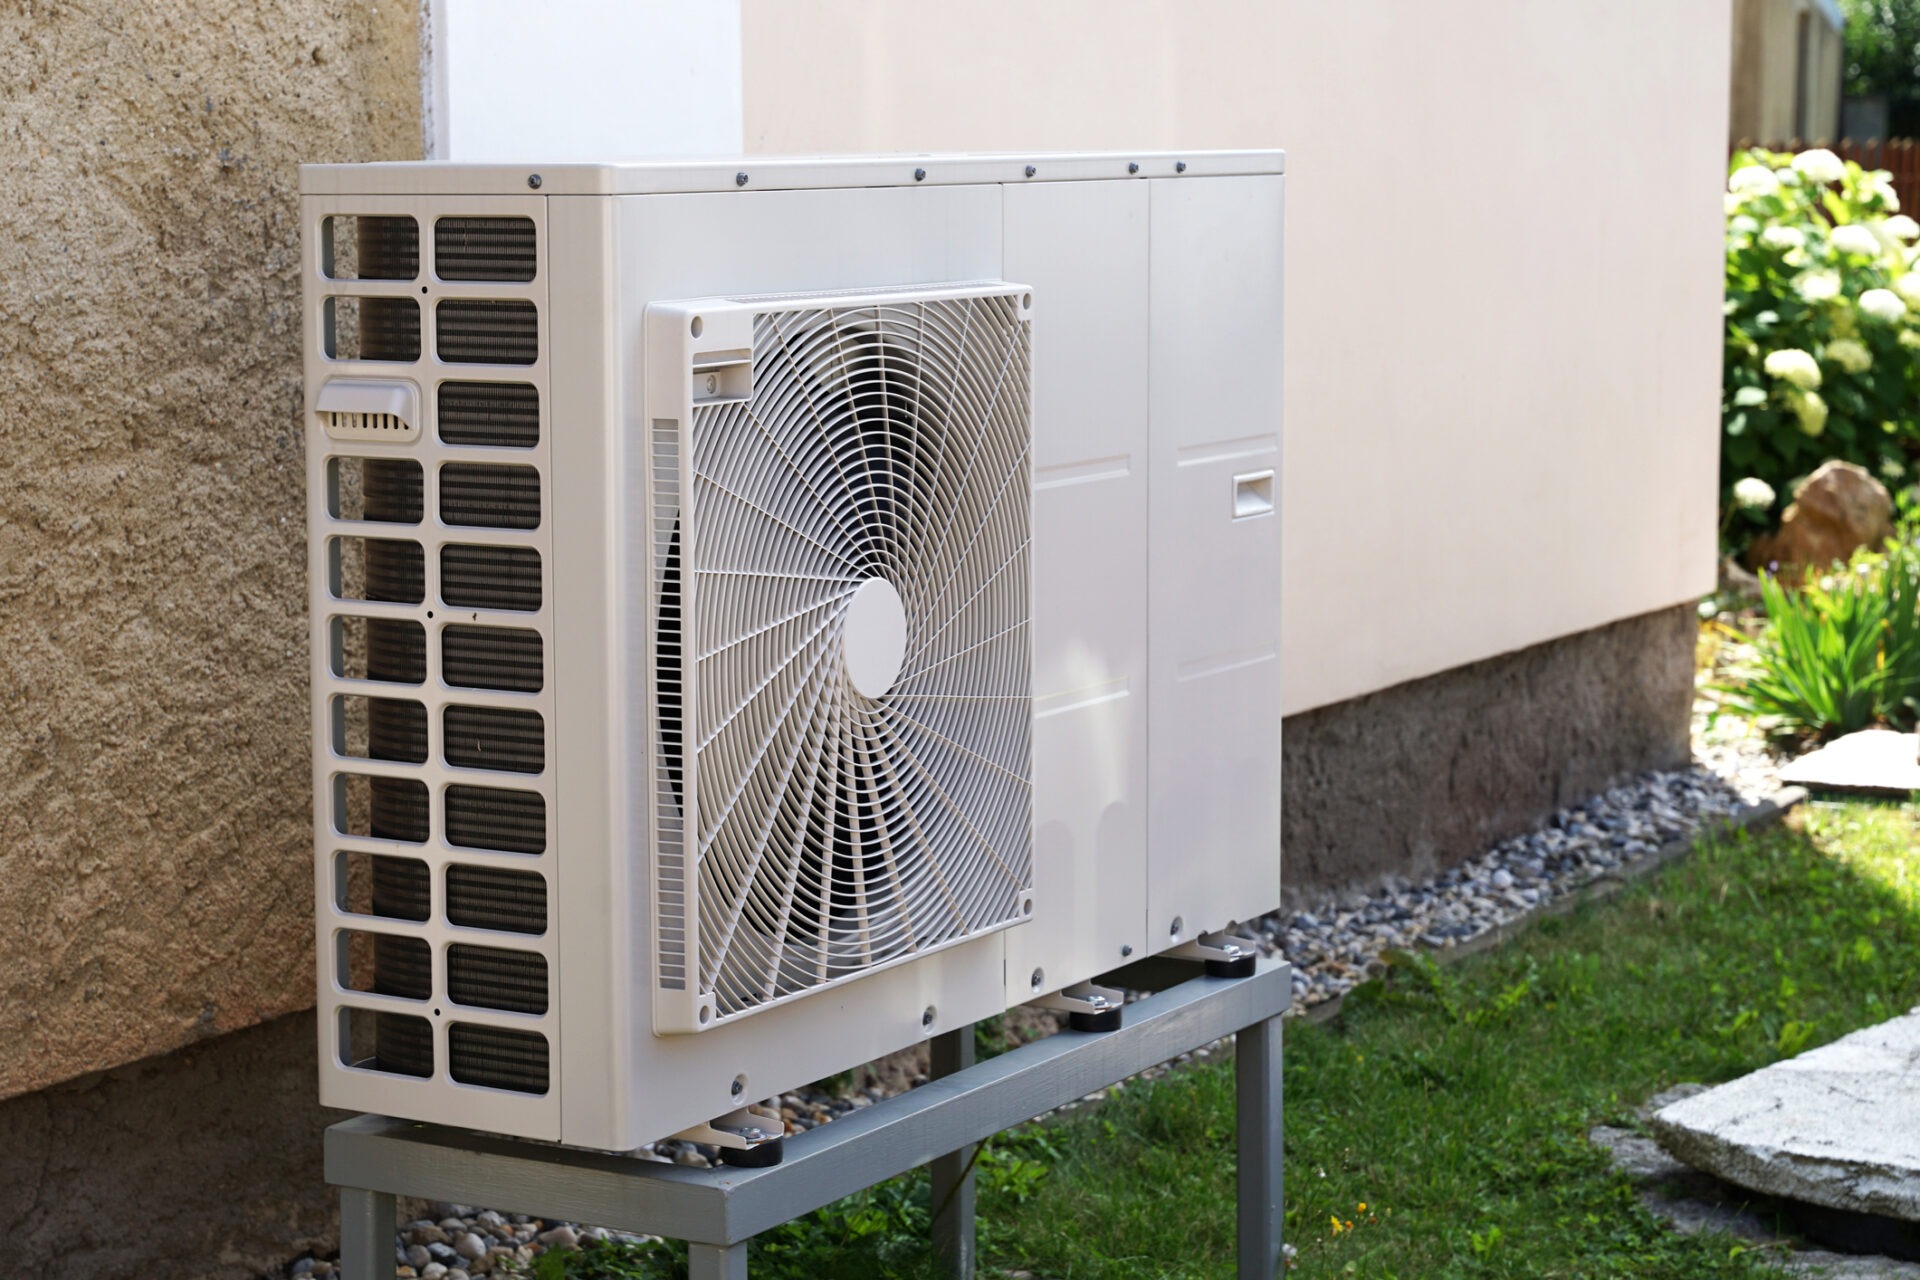 An outdoor heat pump unit is installed on a metal stand beside a house, with a well-manicured lawn and plants in the background.